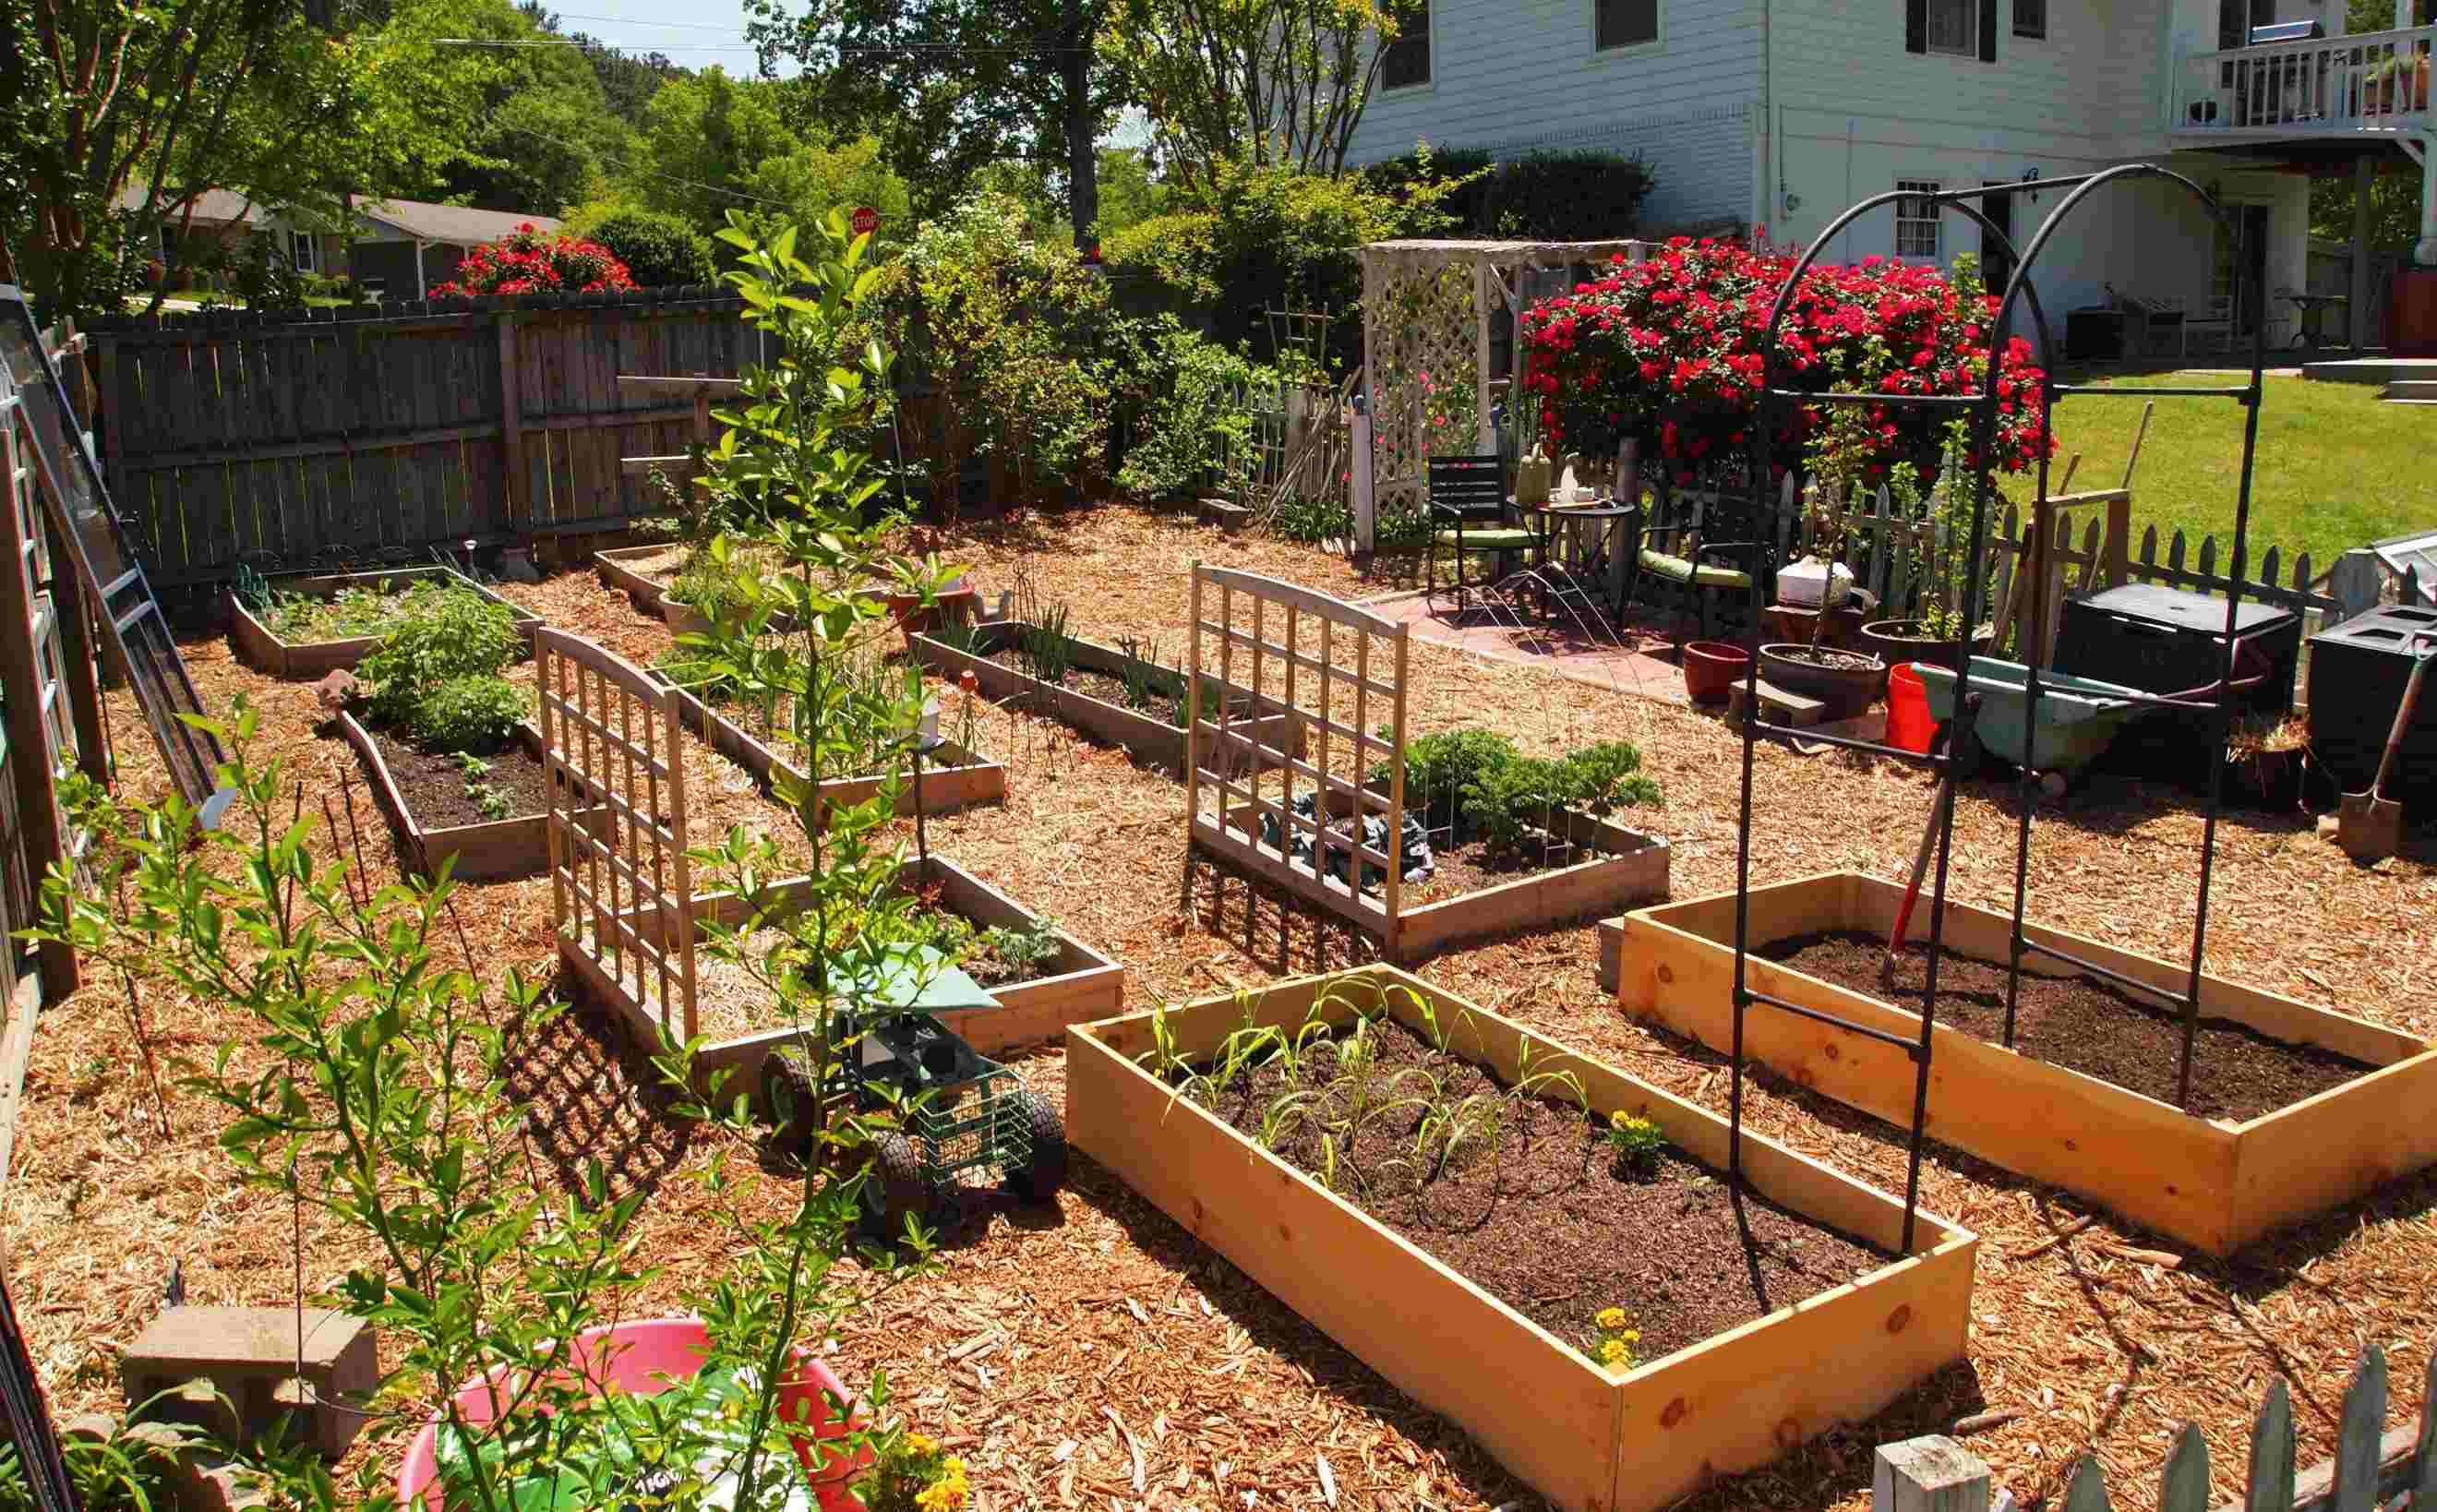 How To Make A Vegetable Garden In The Backyard